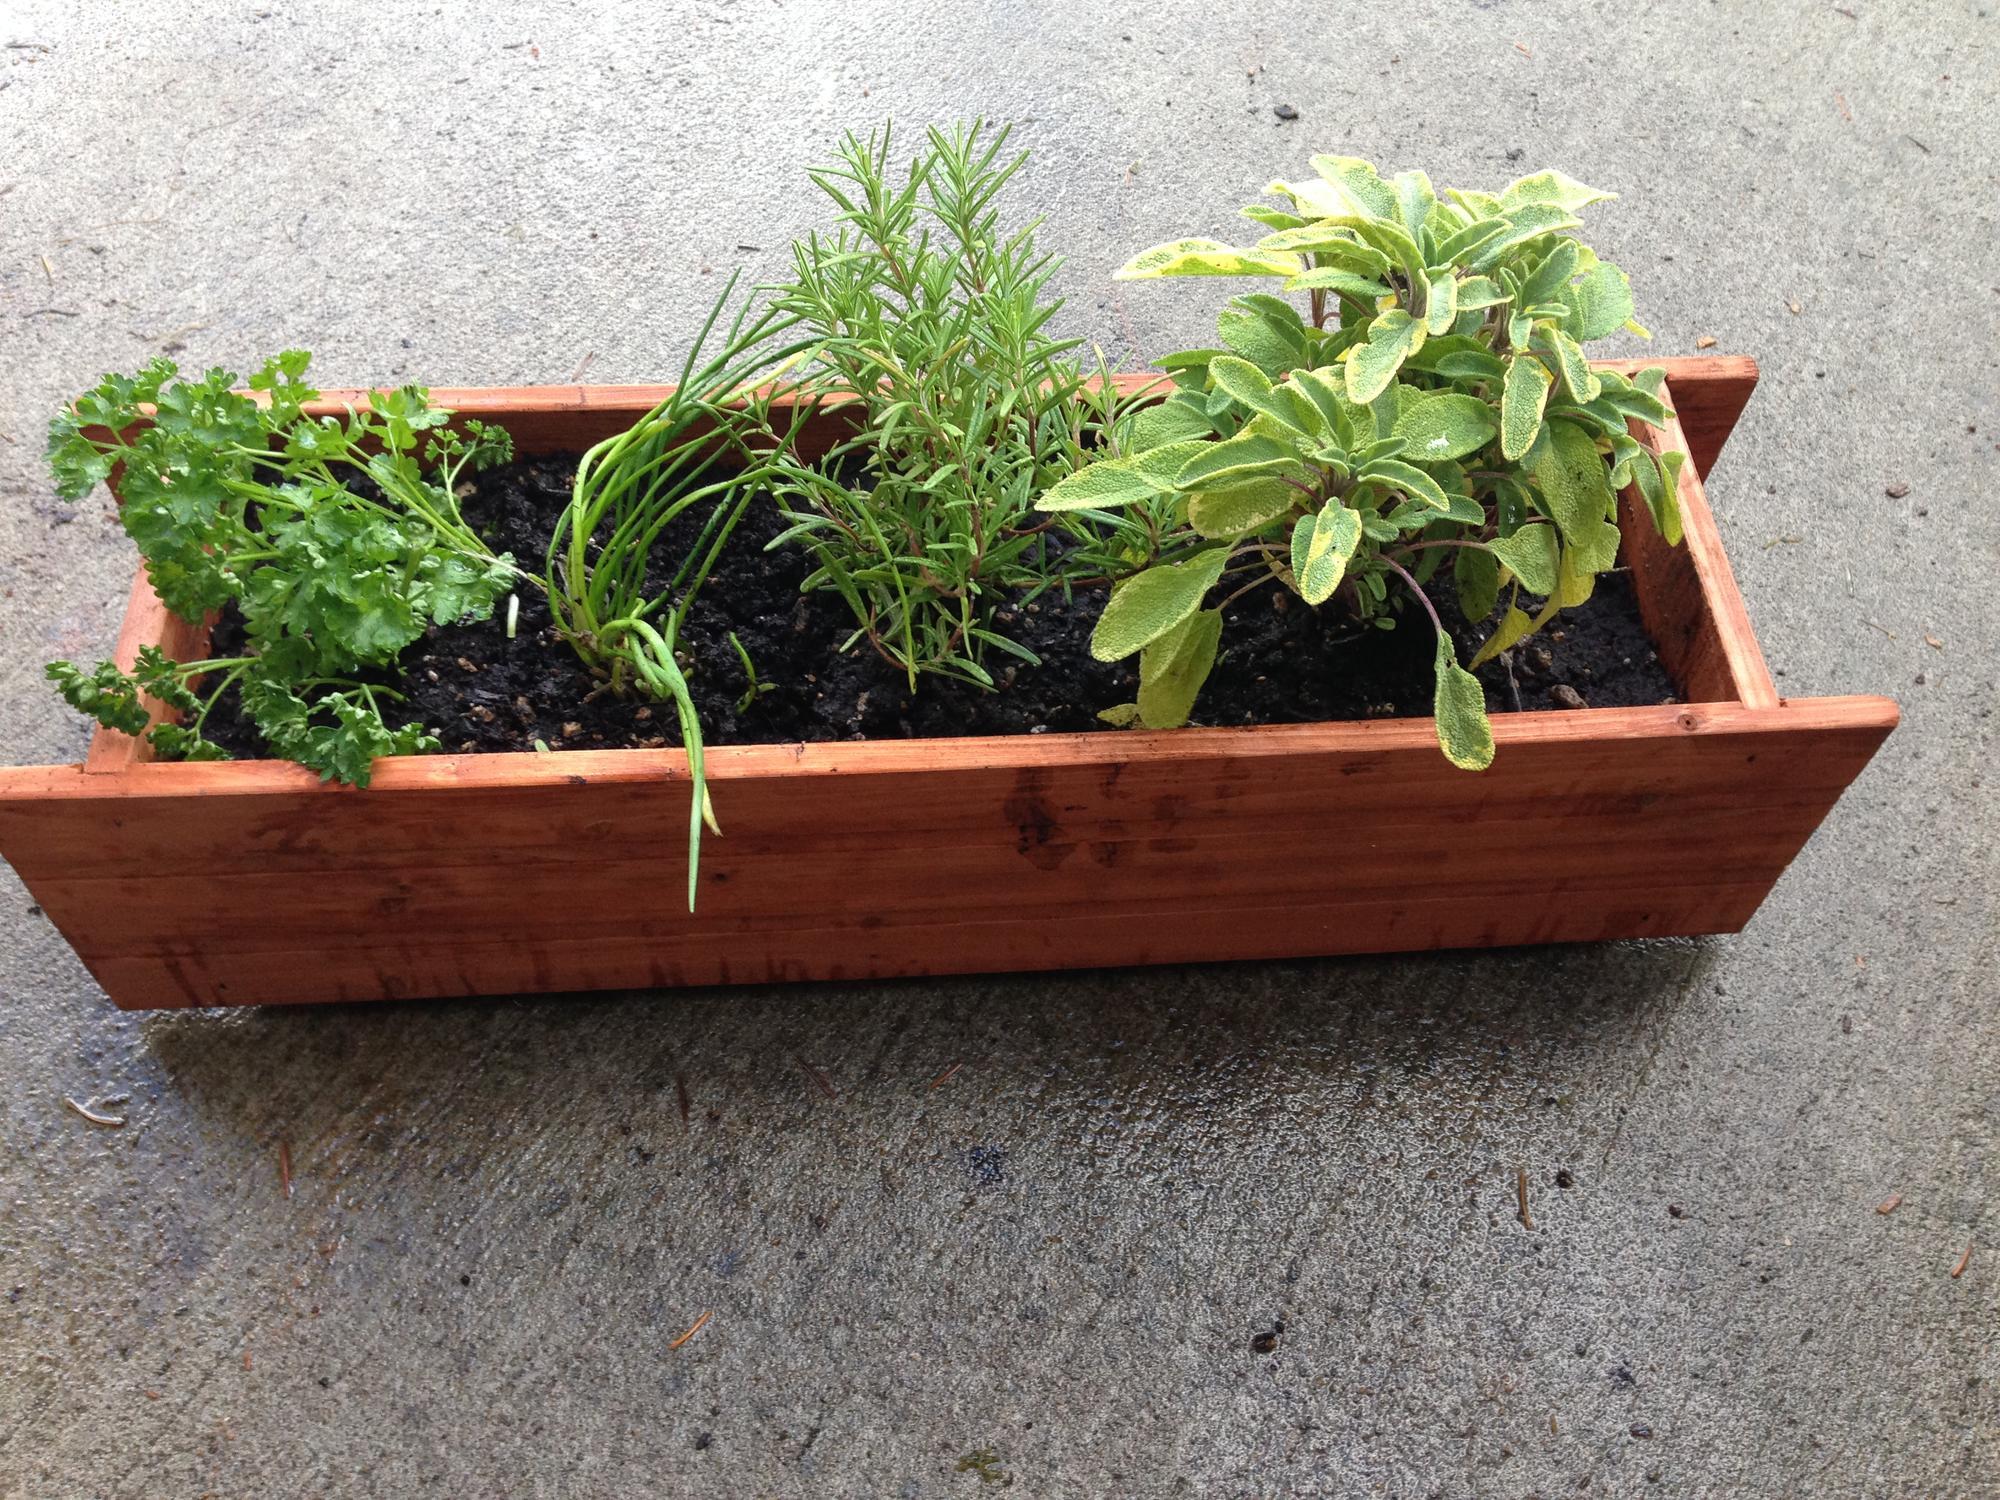 Four different green herbs grow in a wooden container.